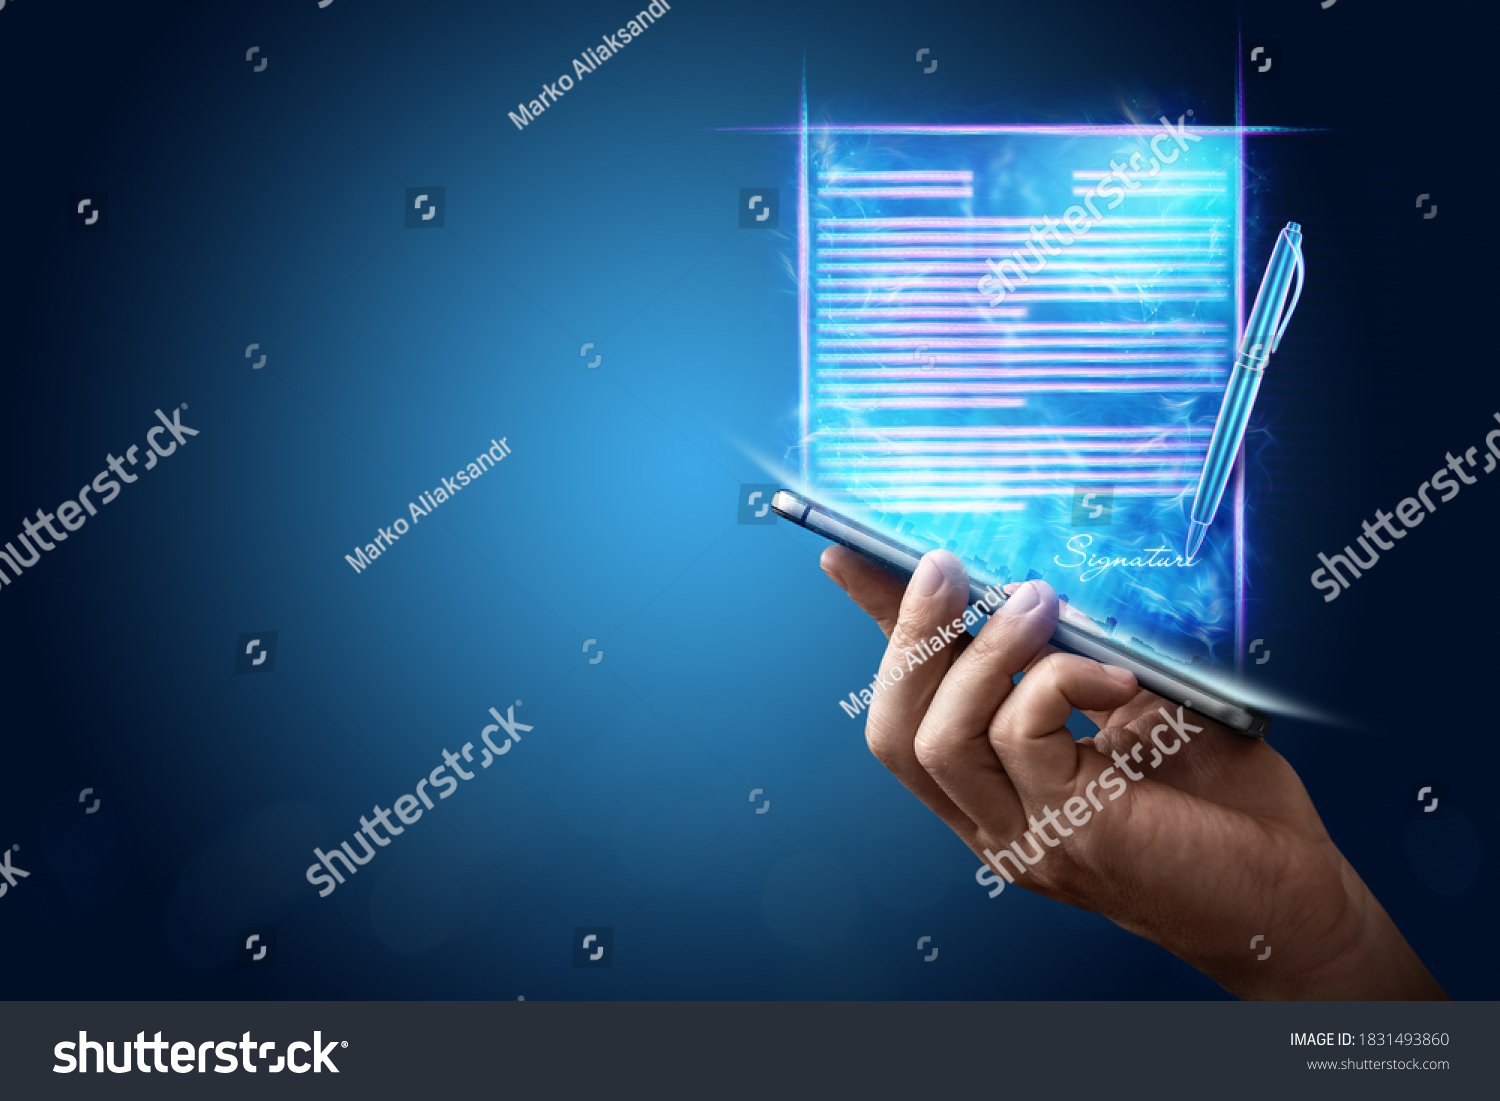 Male hand and modern smartphone hologram contract. Concept for electronic signature, business, remote collaboration, copy space. Mixed media #1831493860